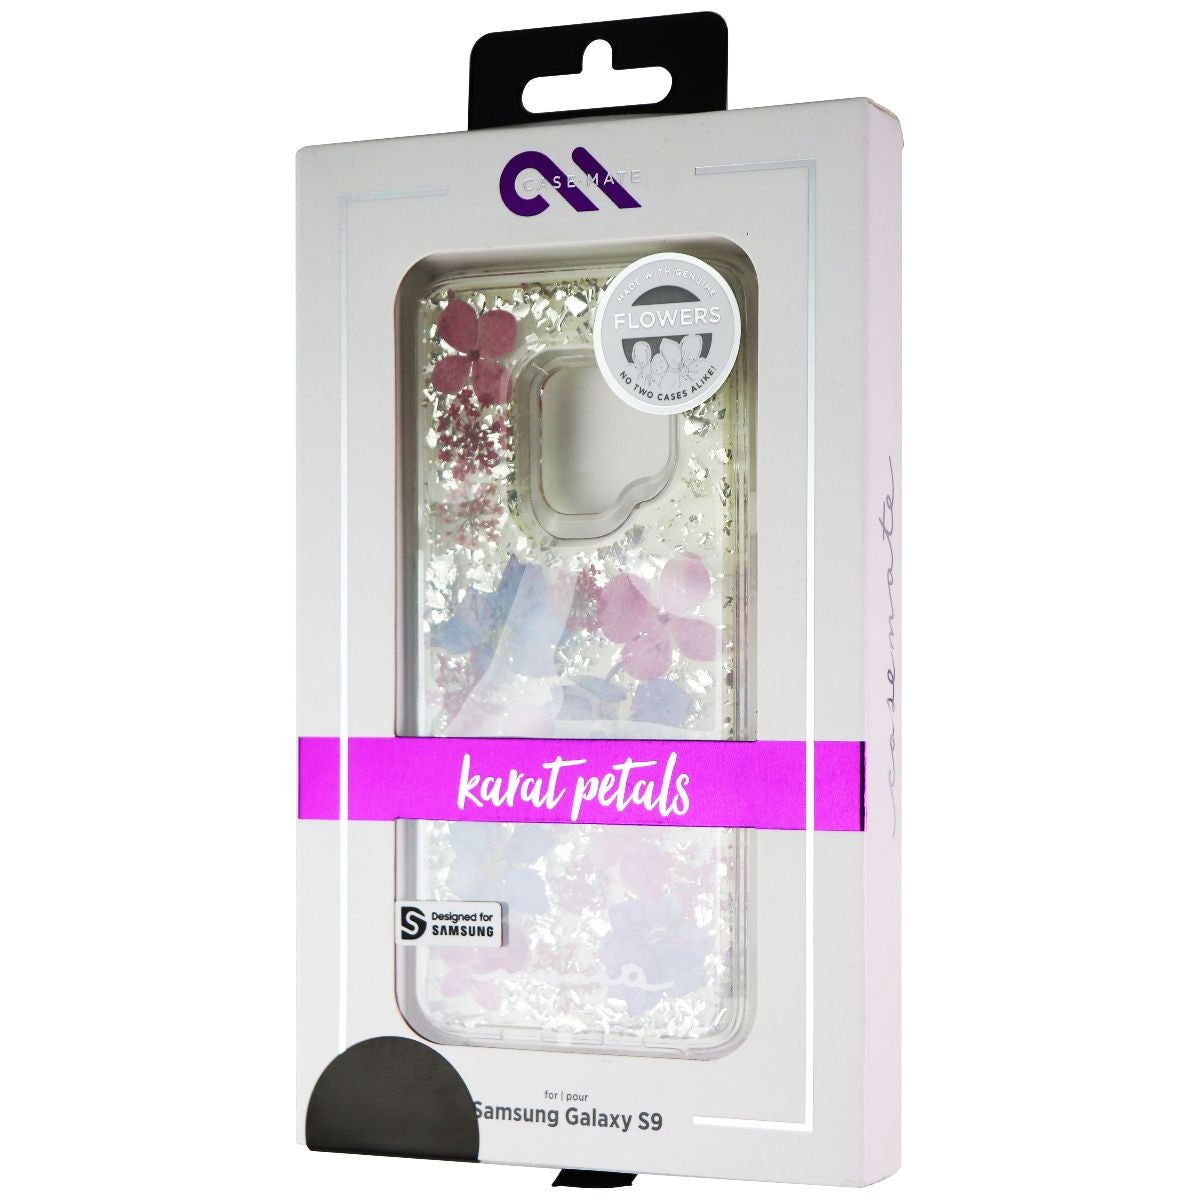 Case-Mate Karat Petals Case for Samsung Galaxy S9 - Clear/Silver Flake/Flowers Cell Phone - Cases, Covers & Skins Case-Mate    - Simple Cell Bulk Wholesale Pricing - USA Seller